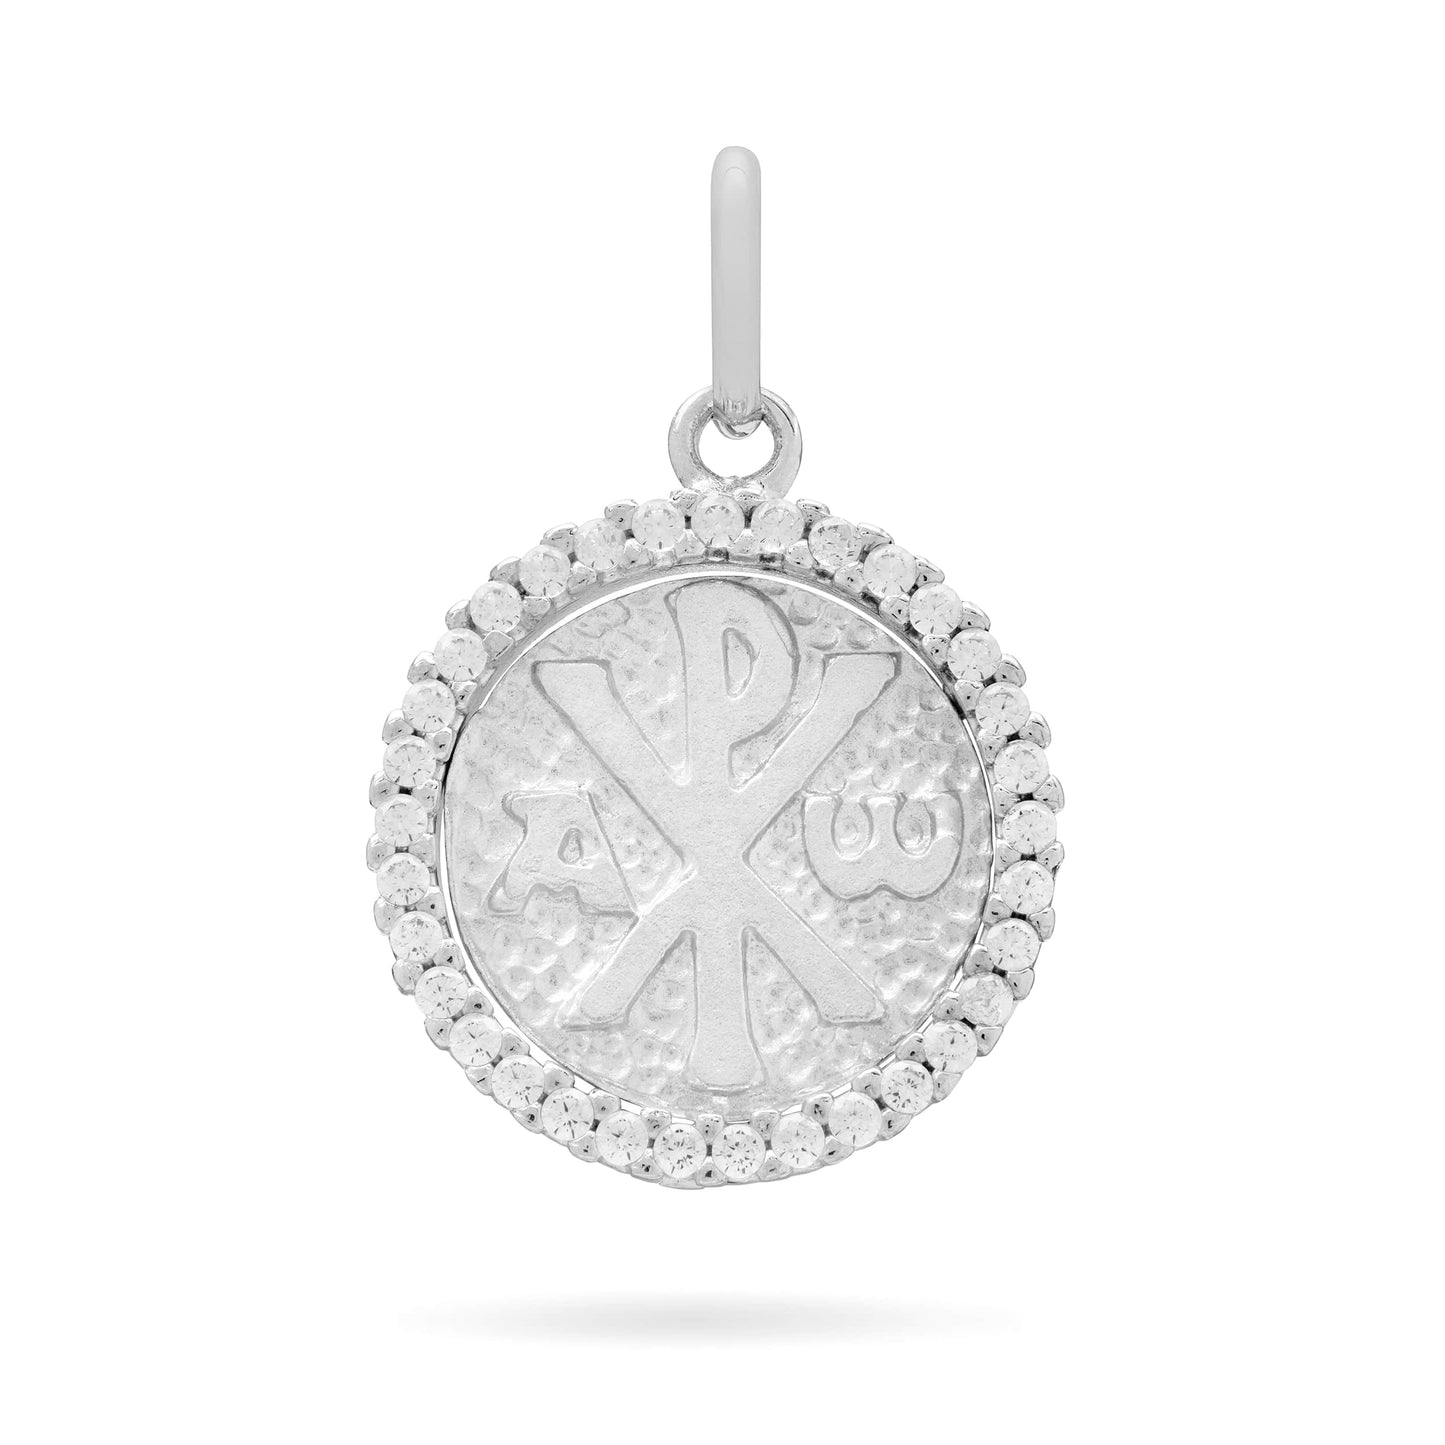 MONDO CATTOLICO Medal 15 mm (0.59 in) Round Sterling Silver Peace Symbol Medal and Mater Ecclesiae